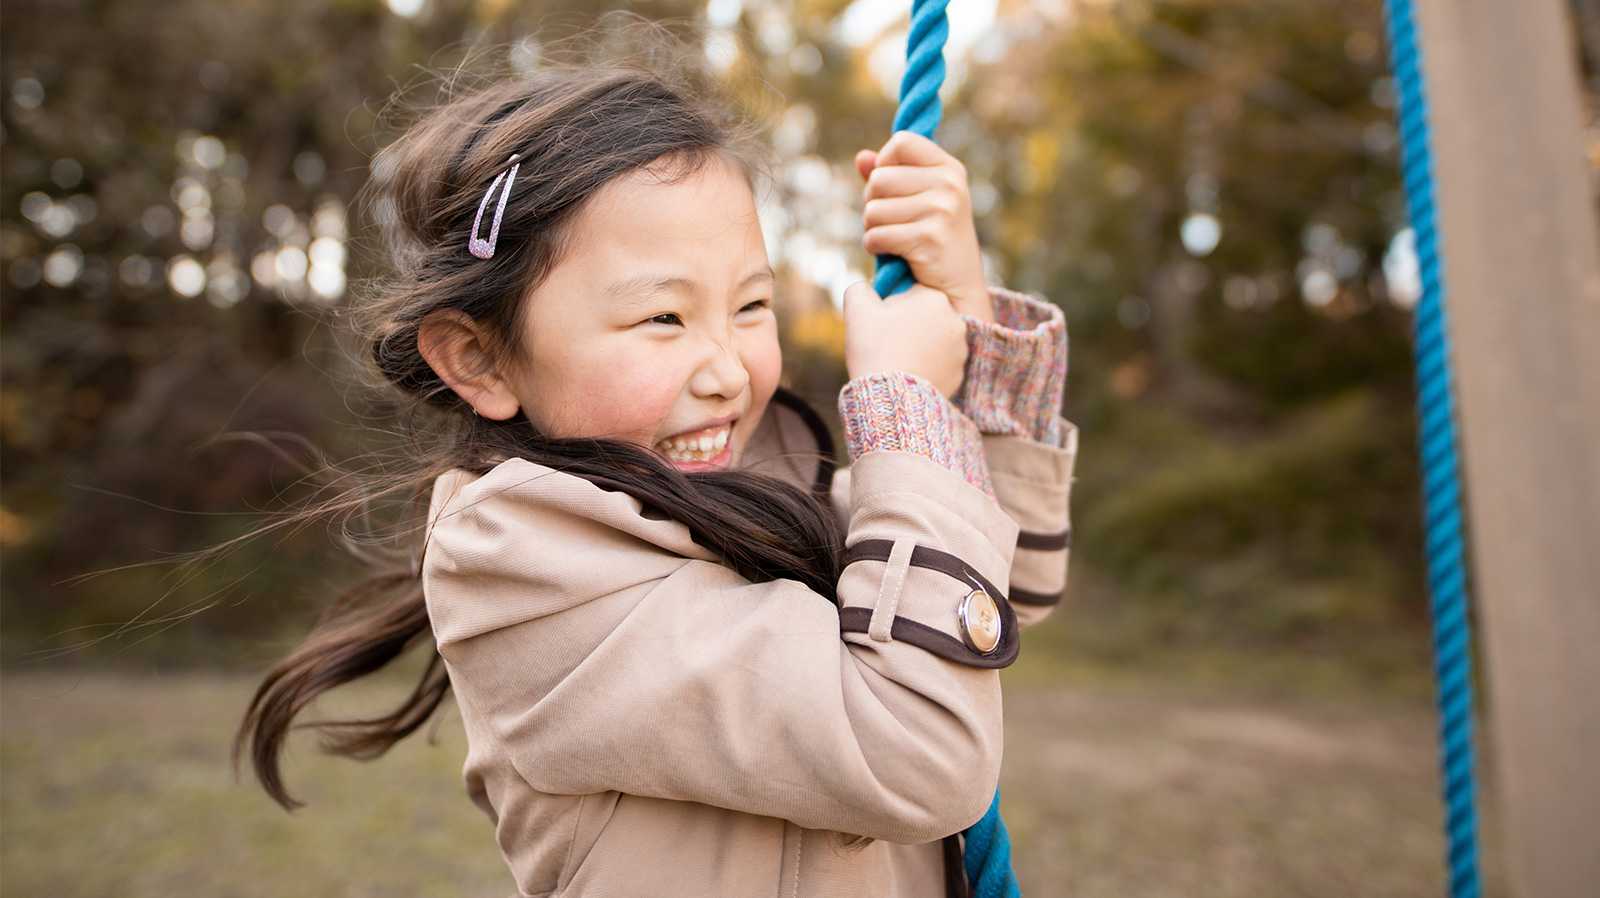 Smiling girl holding onto a playground rope.